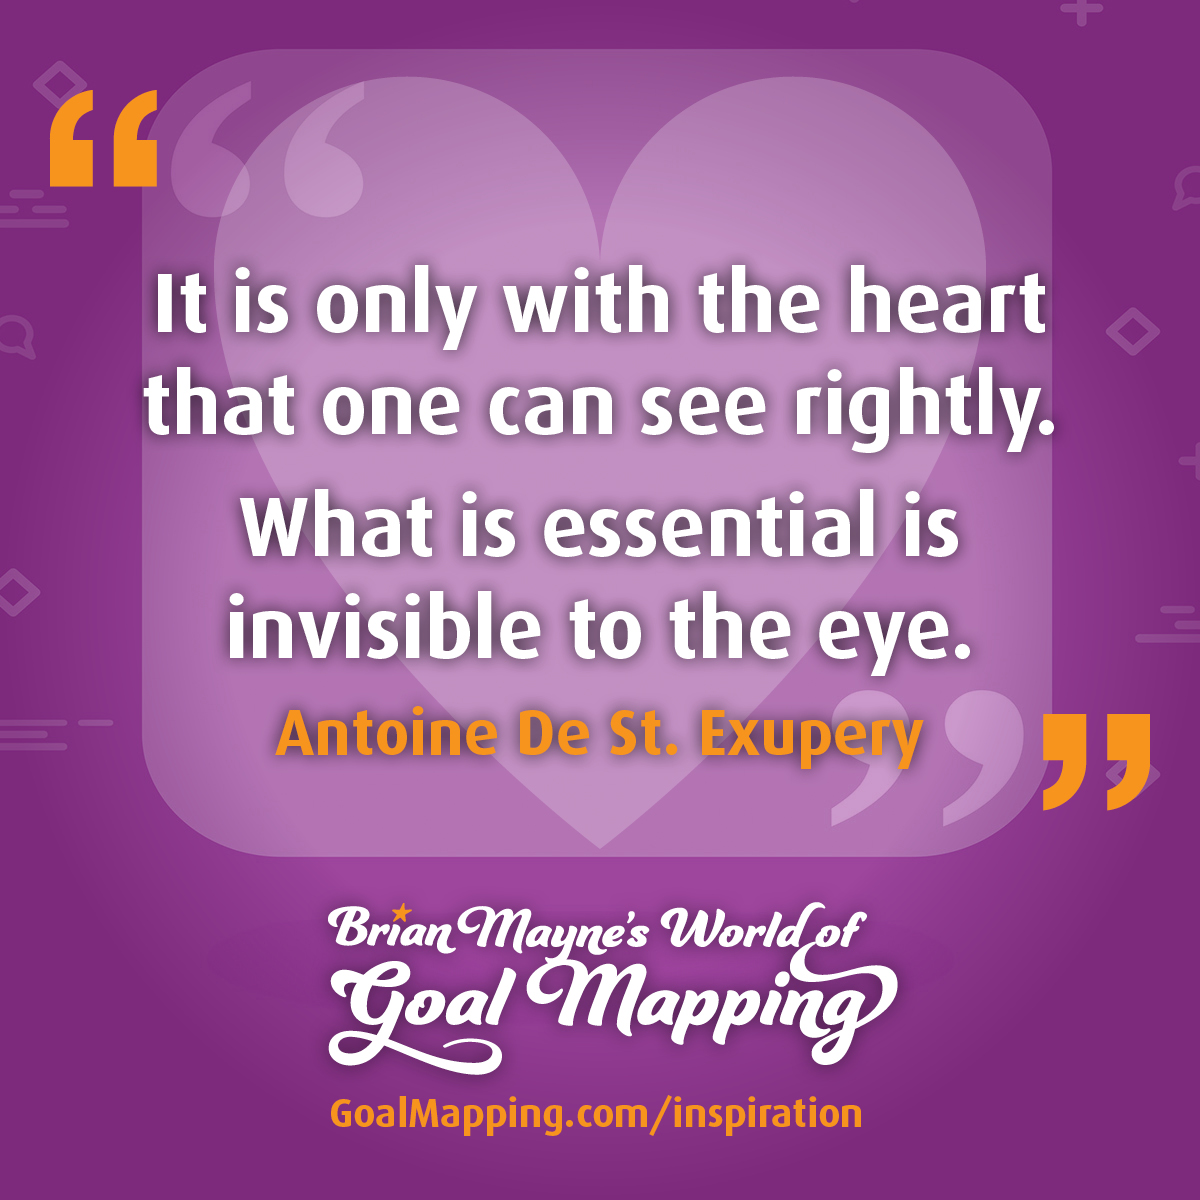 "It is only with the heart that one can see rightly. What is essential is invisible to the eye." Antoine De St. Exupery